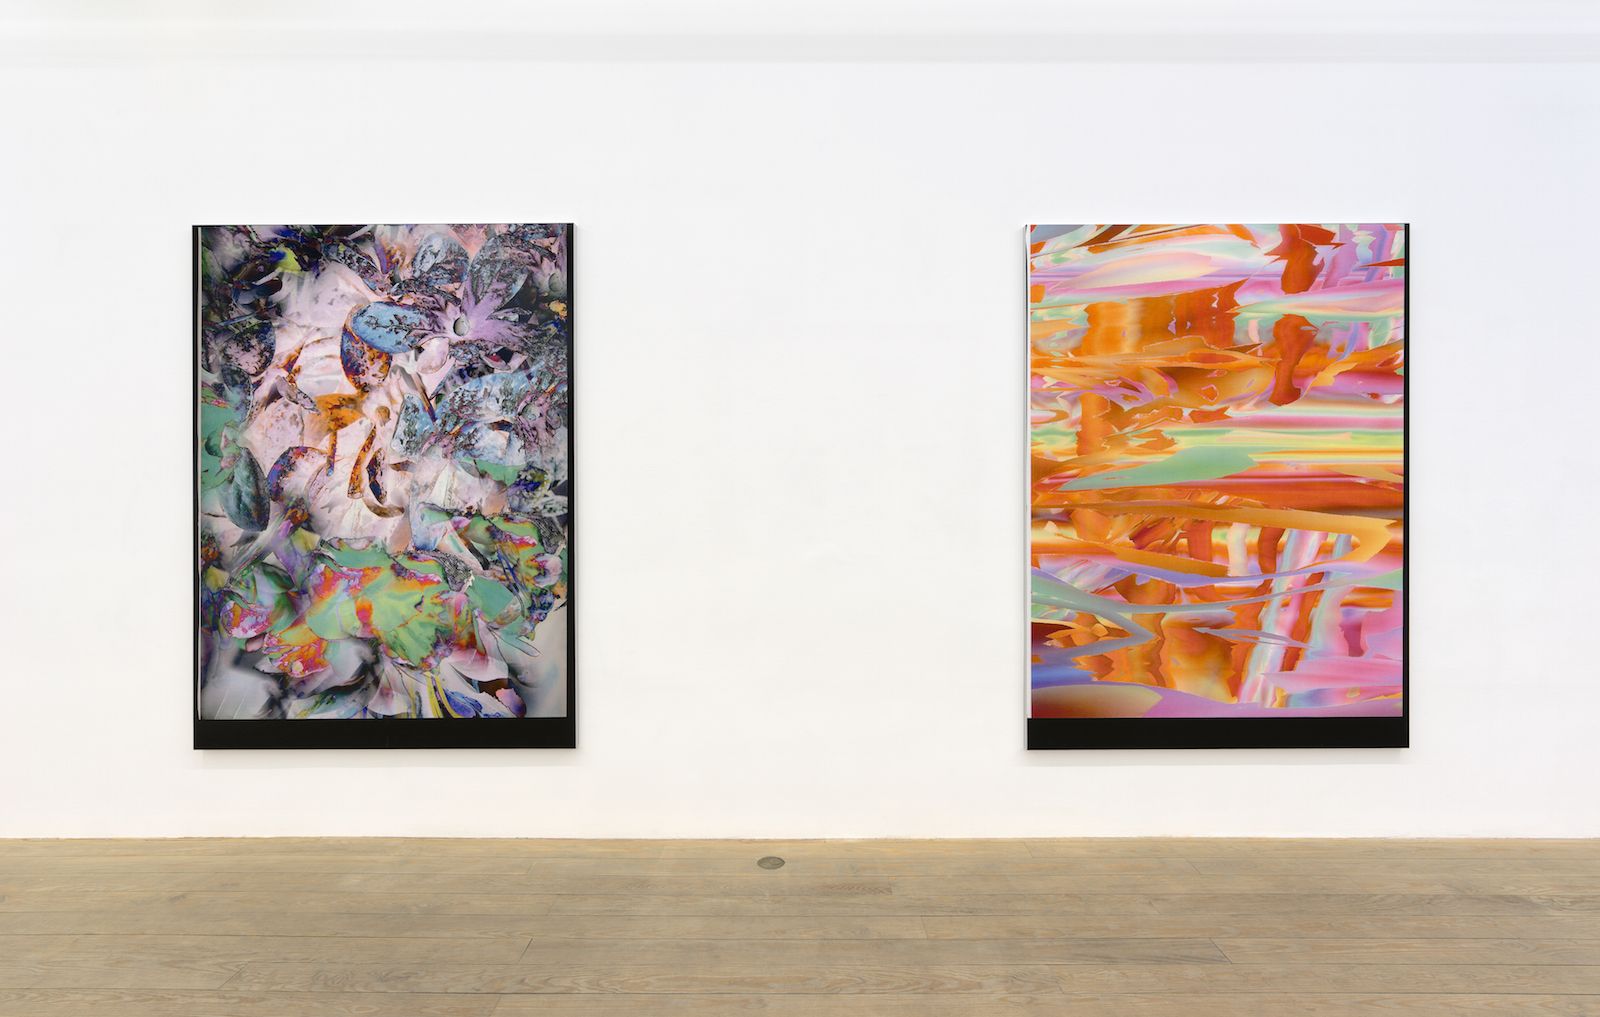 Travess Smalley, 2015, installation view, Foxy Production, New York